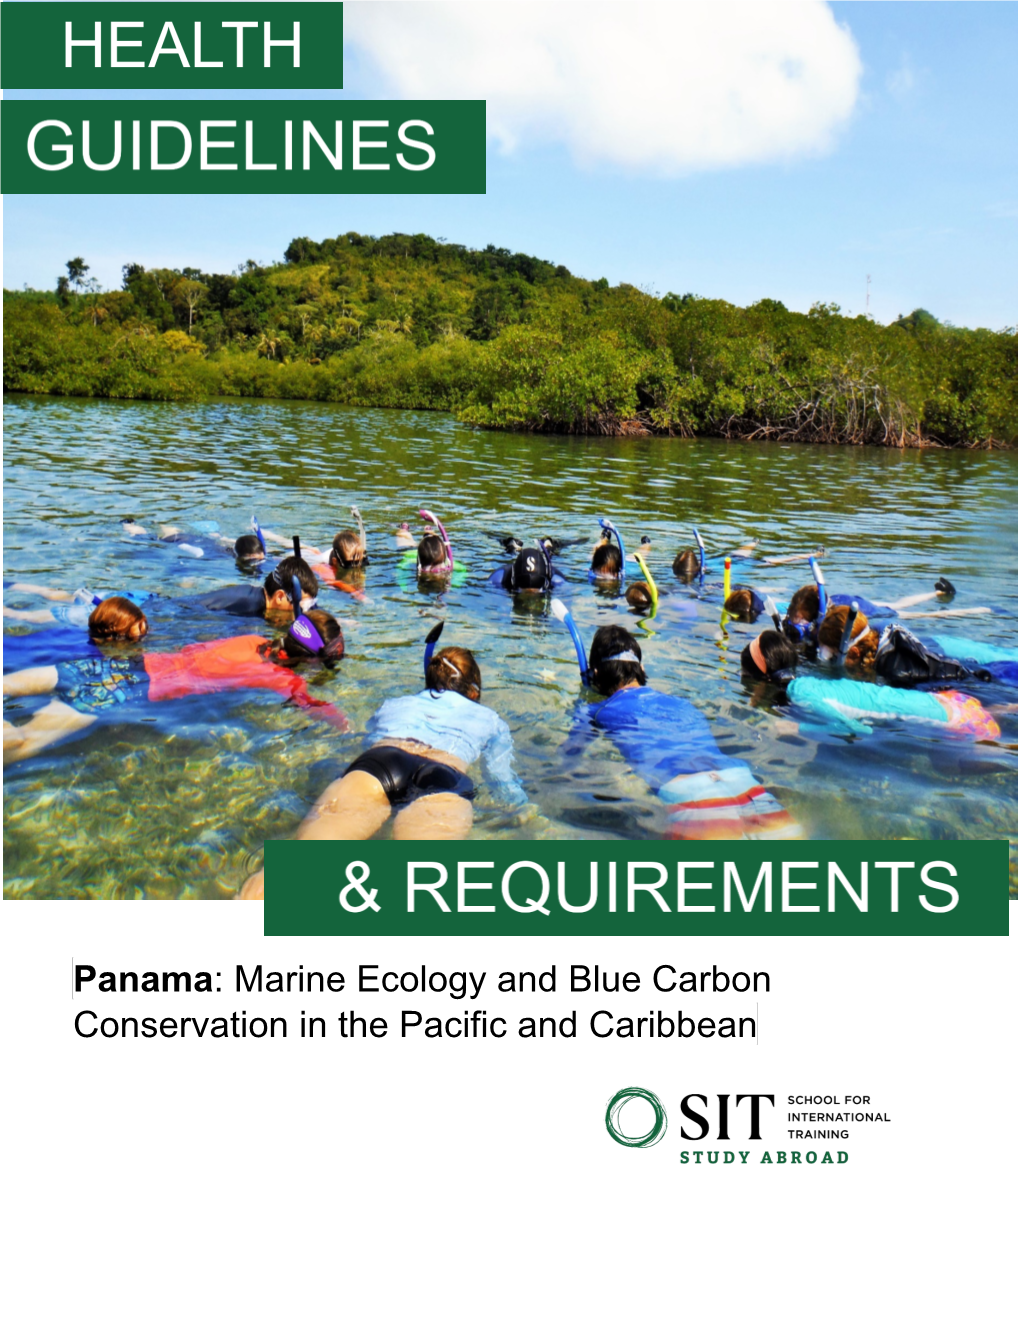 Panama: Marine Ecology and Blue Carbon Conservation in the Pacific and Caribbean